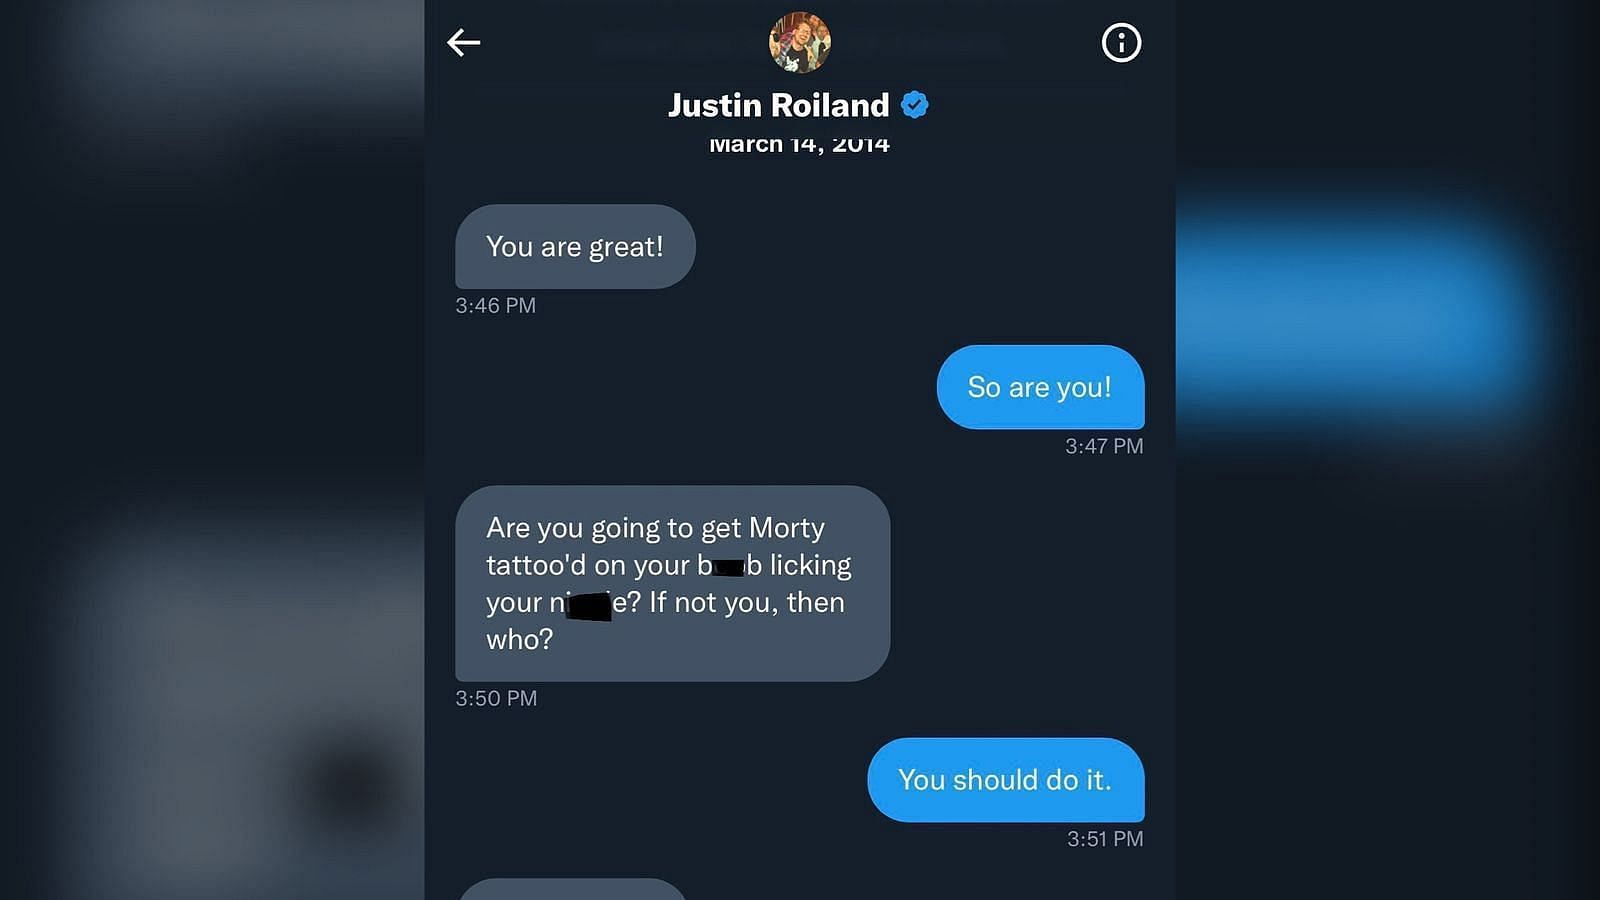 Social media users shared screenshots of conversations with Justin as many reported about the explicit chats on social media. (Image via Twitter/@Cvntfibers)